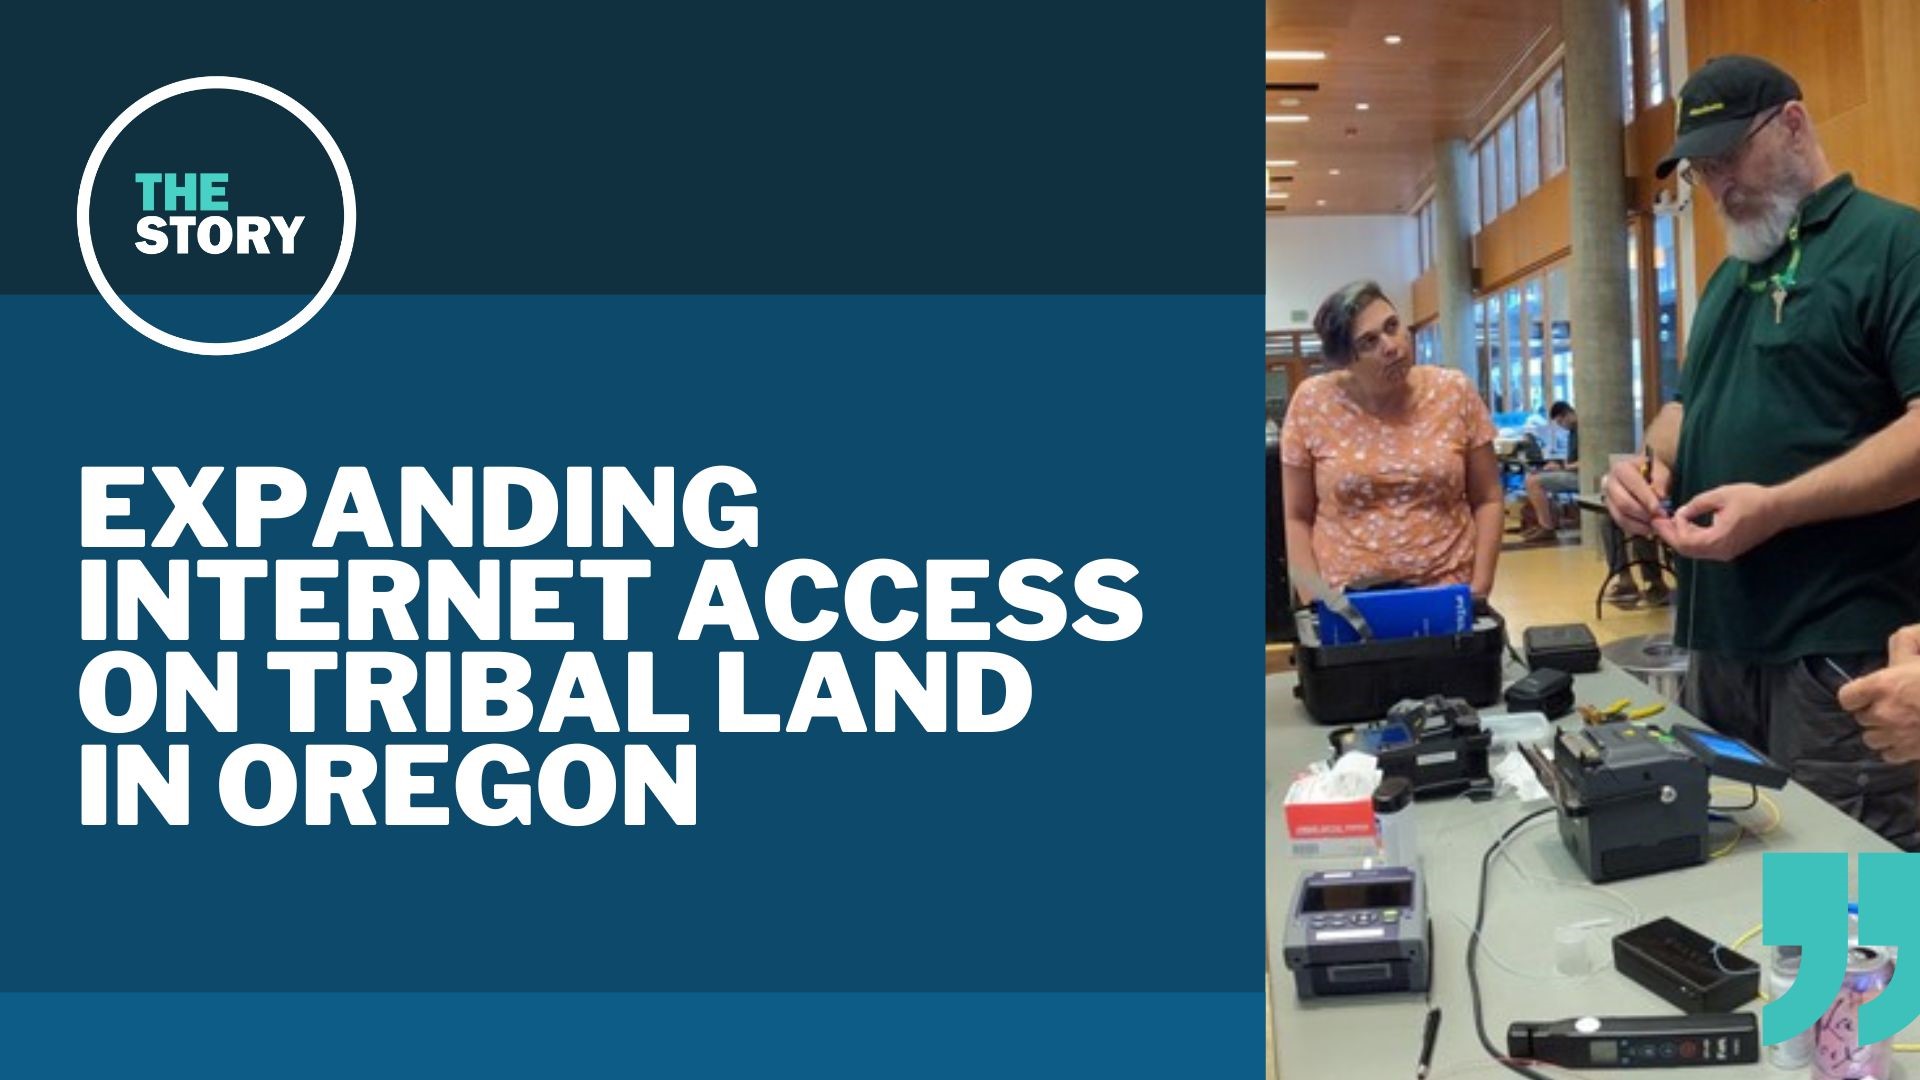 The University of Oregon hosted an event where representatives from tribes all over Oregon learned how to expand and improve their internet access.